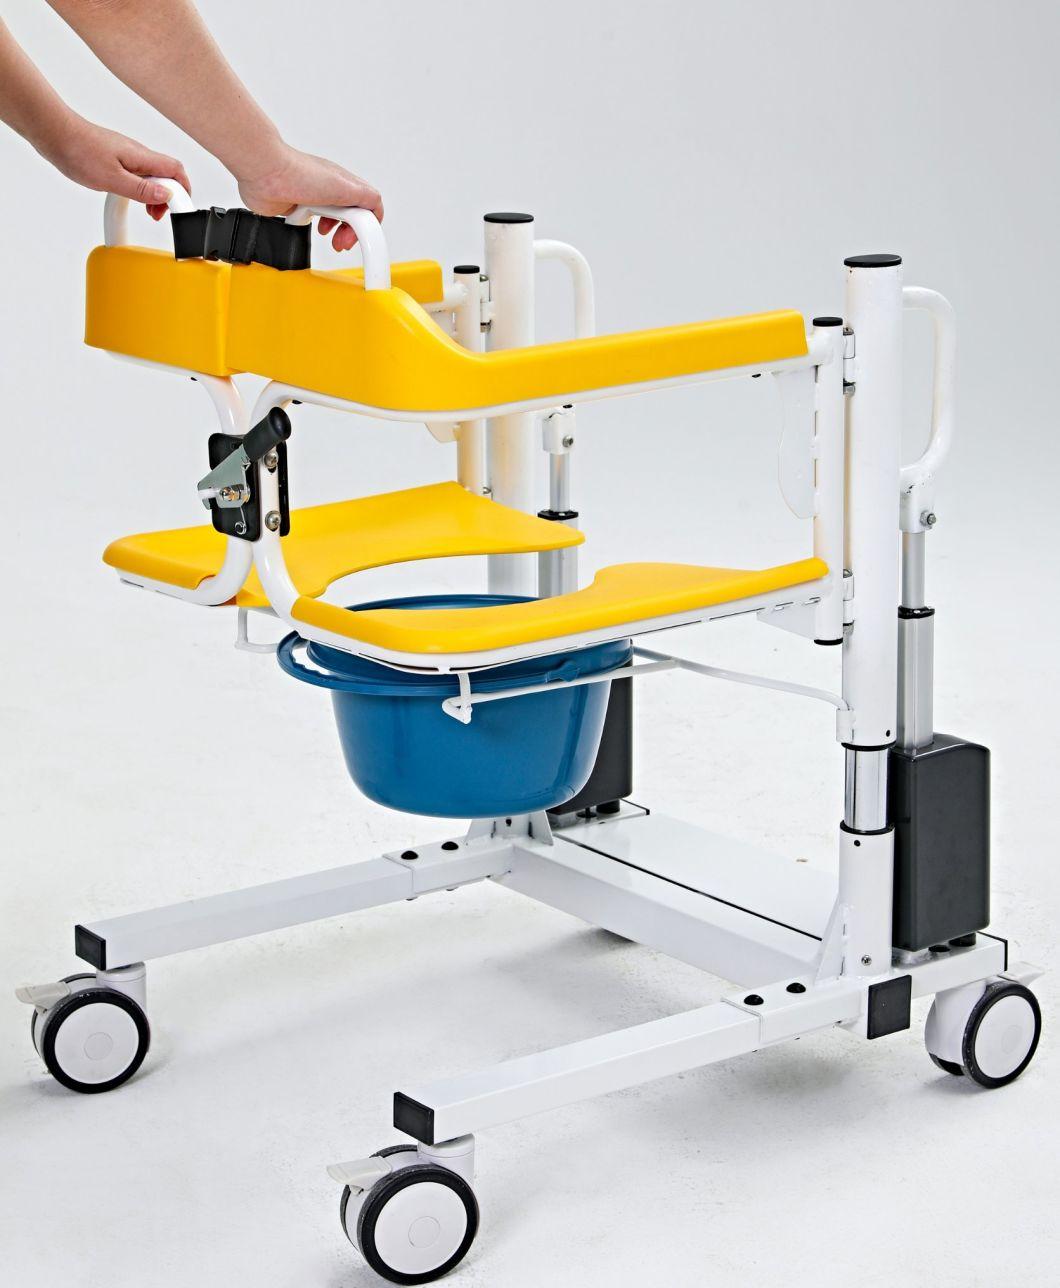 Mn-Ywj002 Hospital Patients Transfer Mobile Lifting Chair Electric Manual Patient Transfer Lift Chair